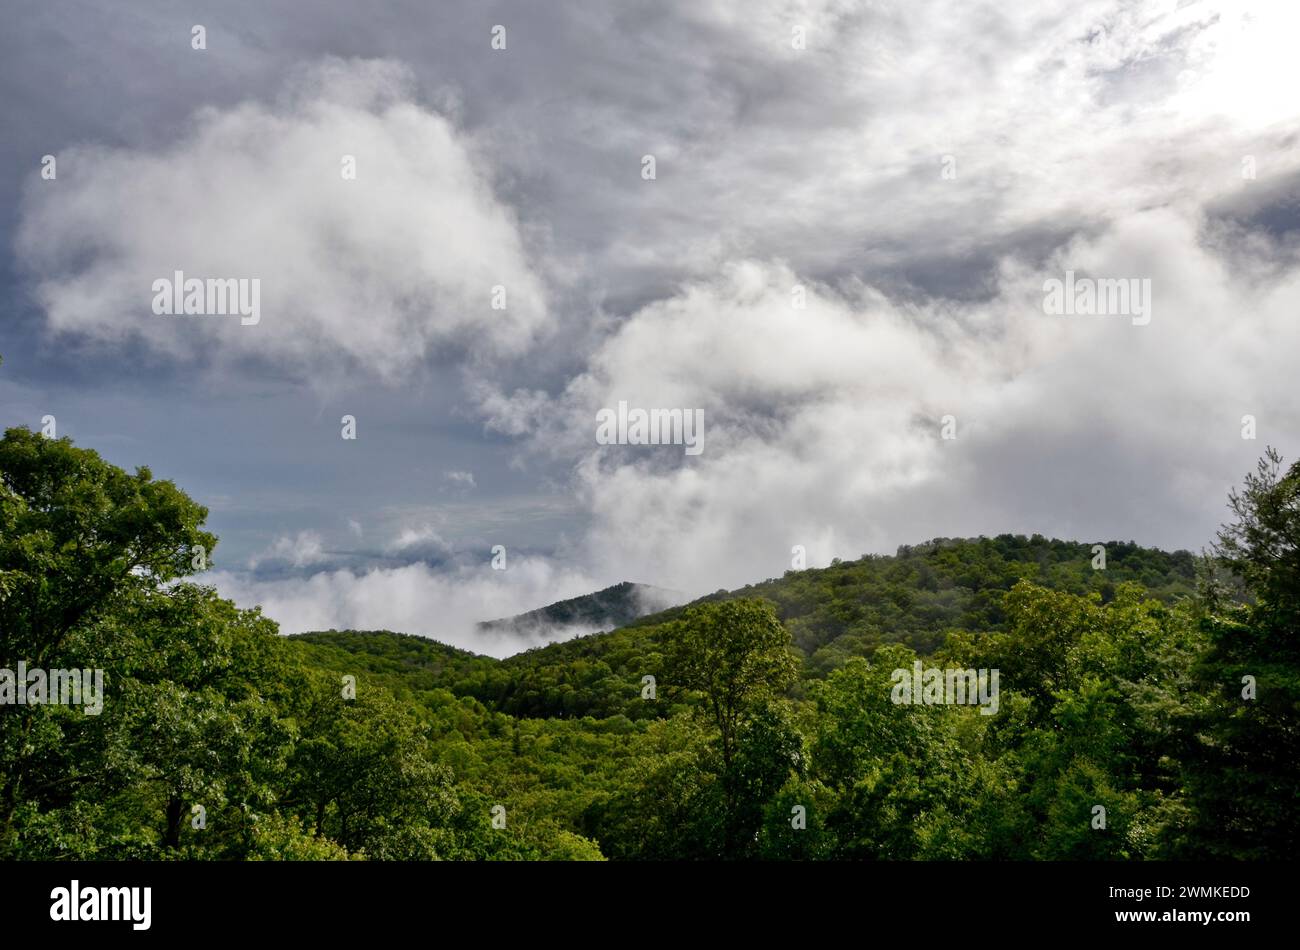 Storm clouds roll over mountains wth lush green vegetation Stock Photo